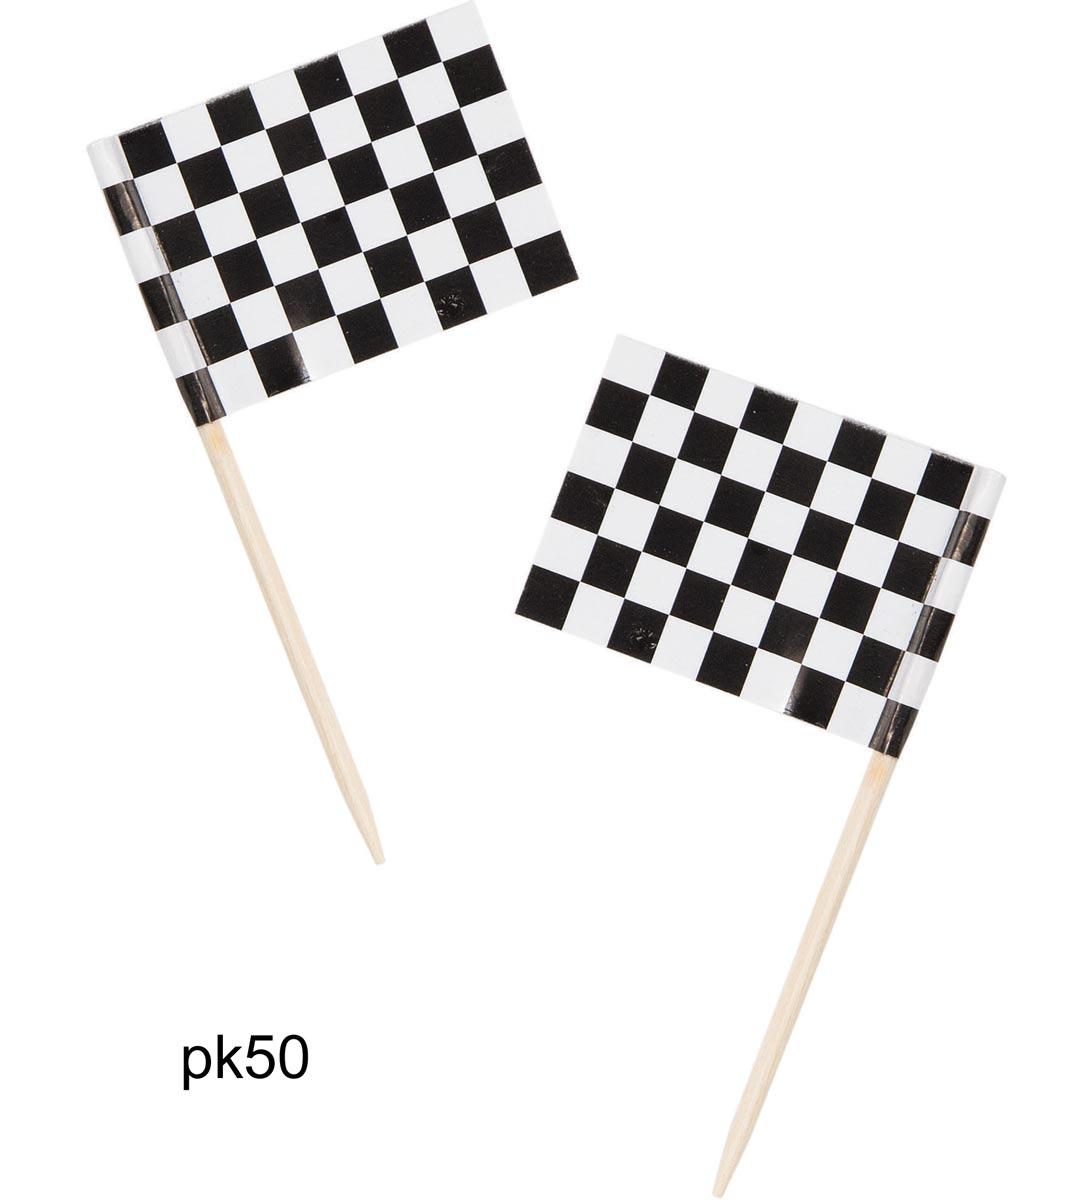 Grand Prix Flag Picks - Pkt 50 in Black and White by Creative Party 10223 available here at Karnival Costumes online party shop